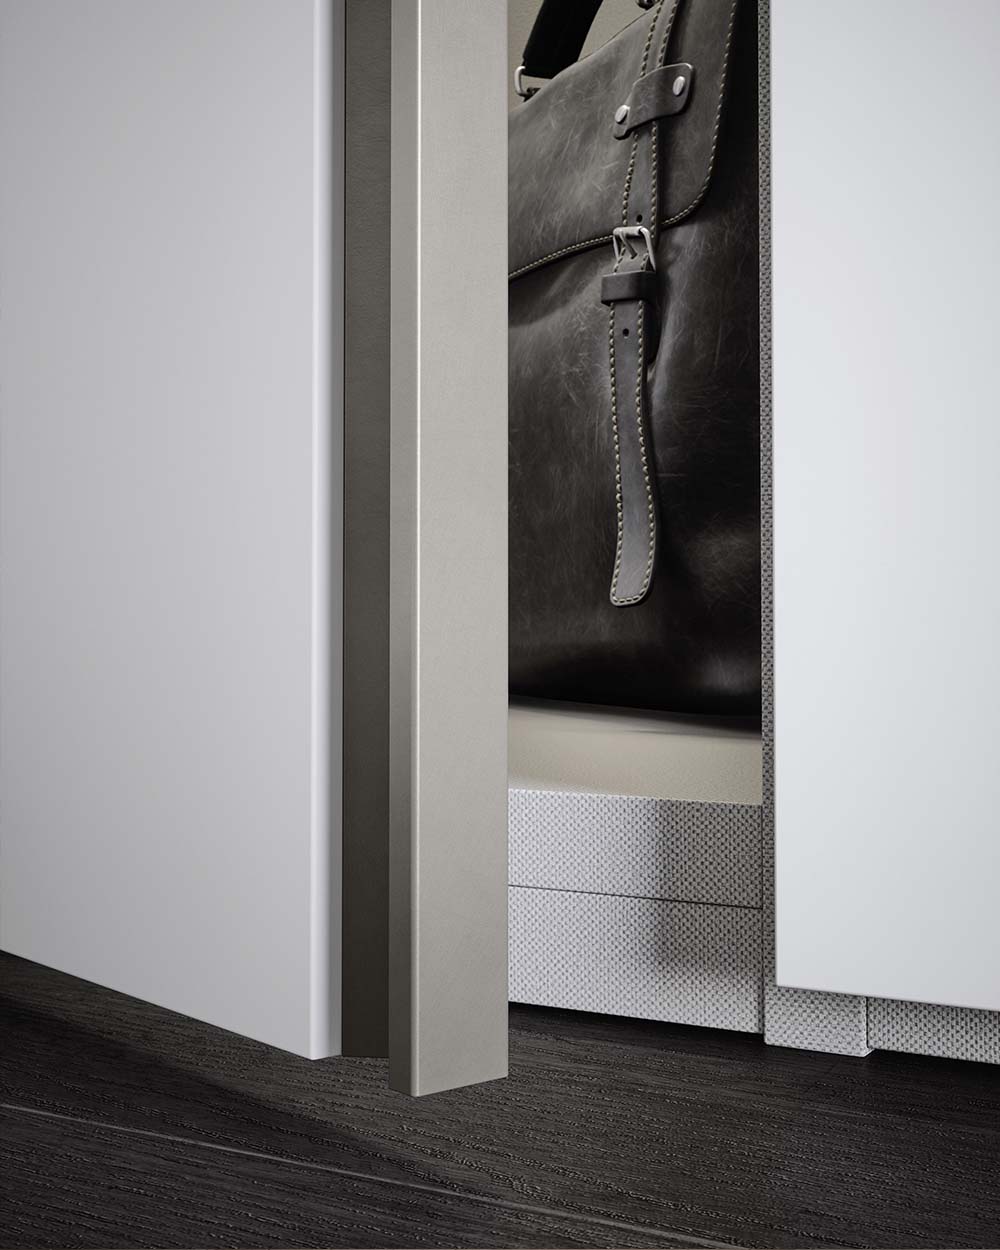 White fitted modular wardrobe units with luxury TV mounting panel. Designed and fitted by Krieder UK.